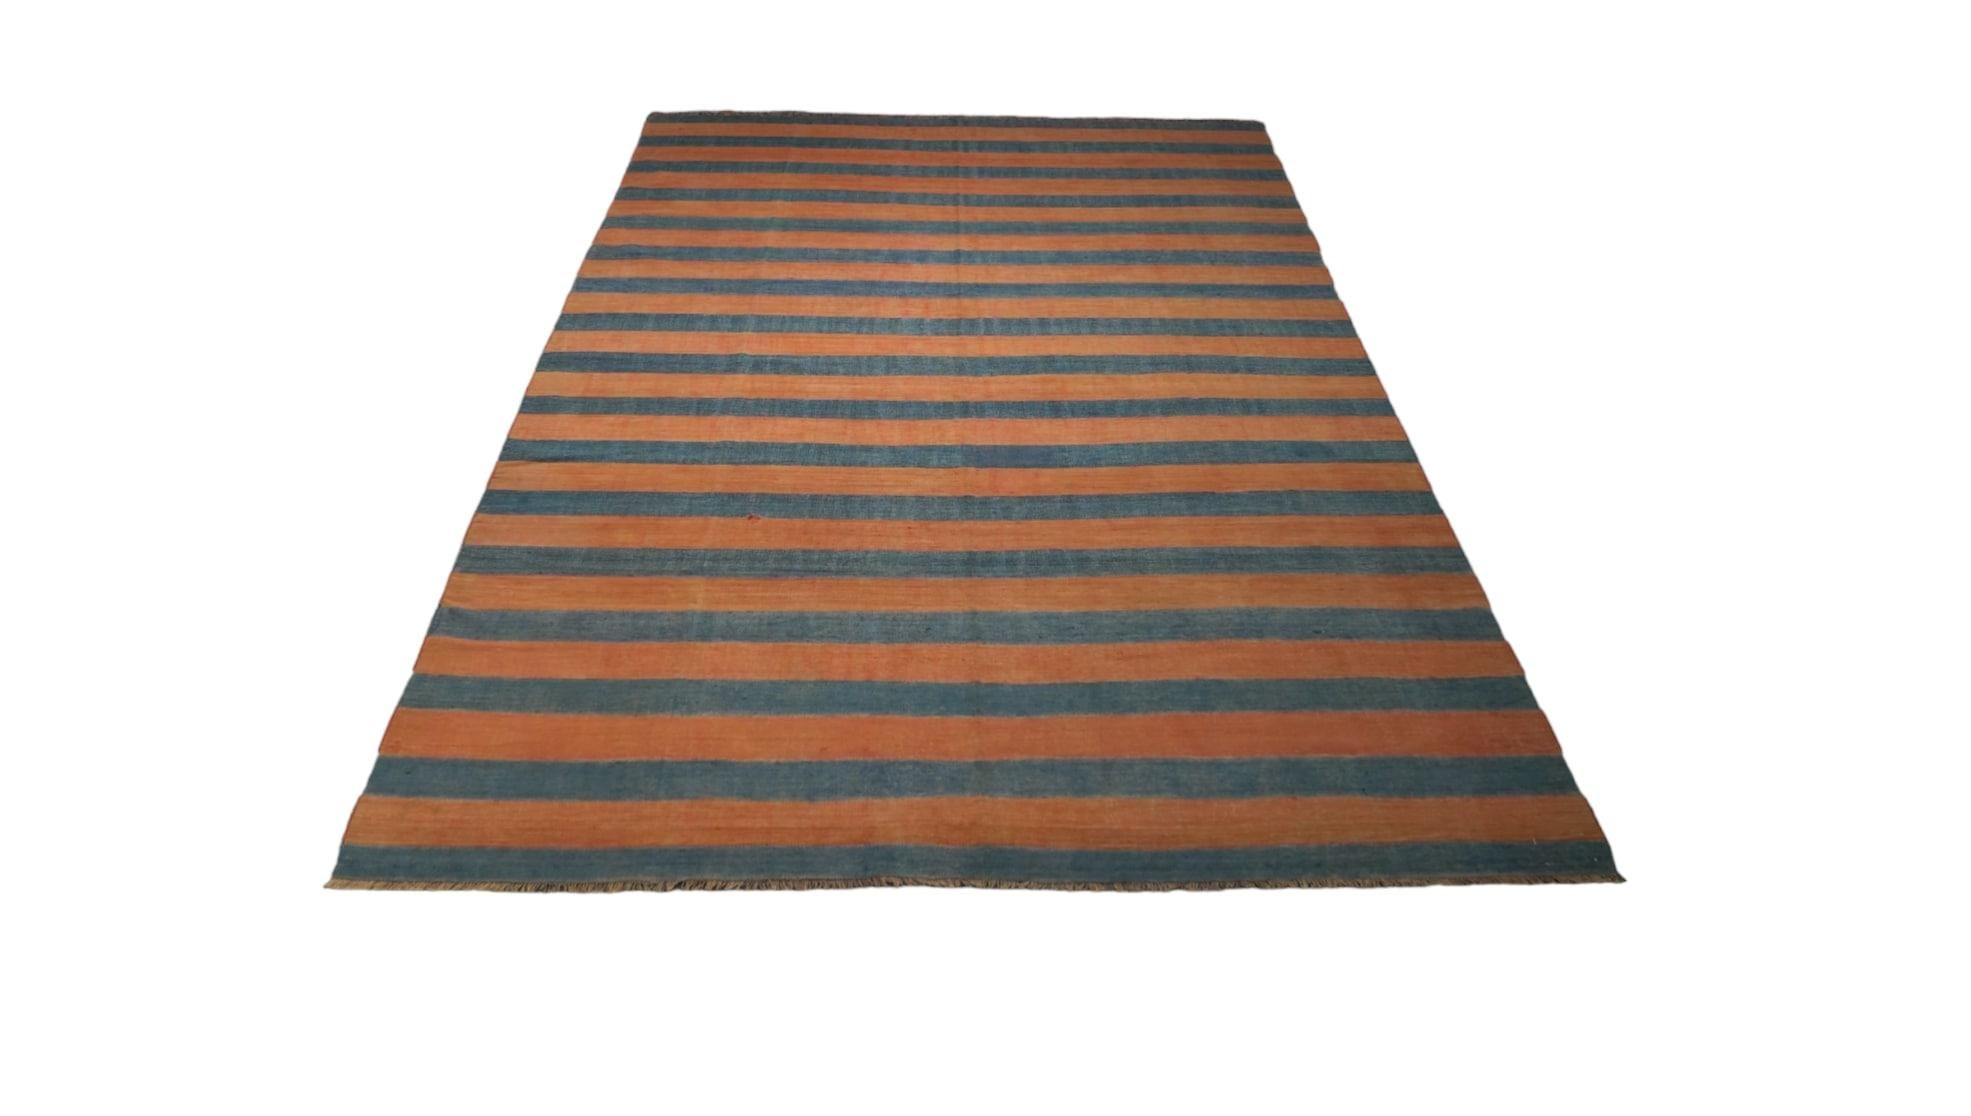 This vintage 6x8 Dhurrie flat weave is an exciting new entry in Rug & Kilim’s esteemed collection. Handwoven in wool, it originates from India circa 1950-1960. 

On the Design: 

From Rug & Kilim’s exclusive collection of vintage flatweaves, a